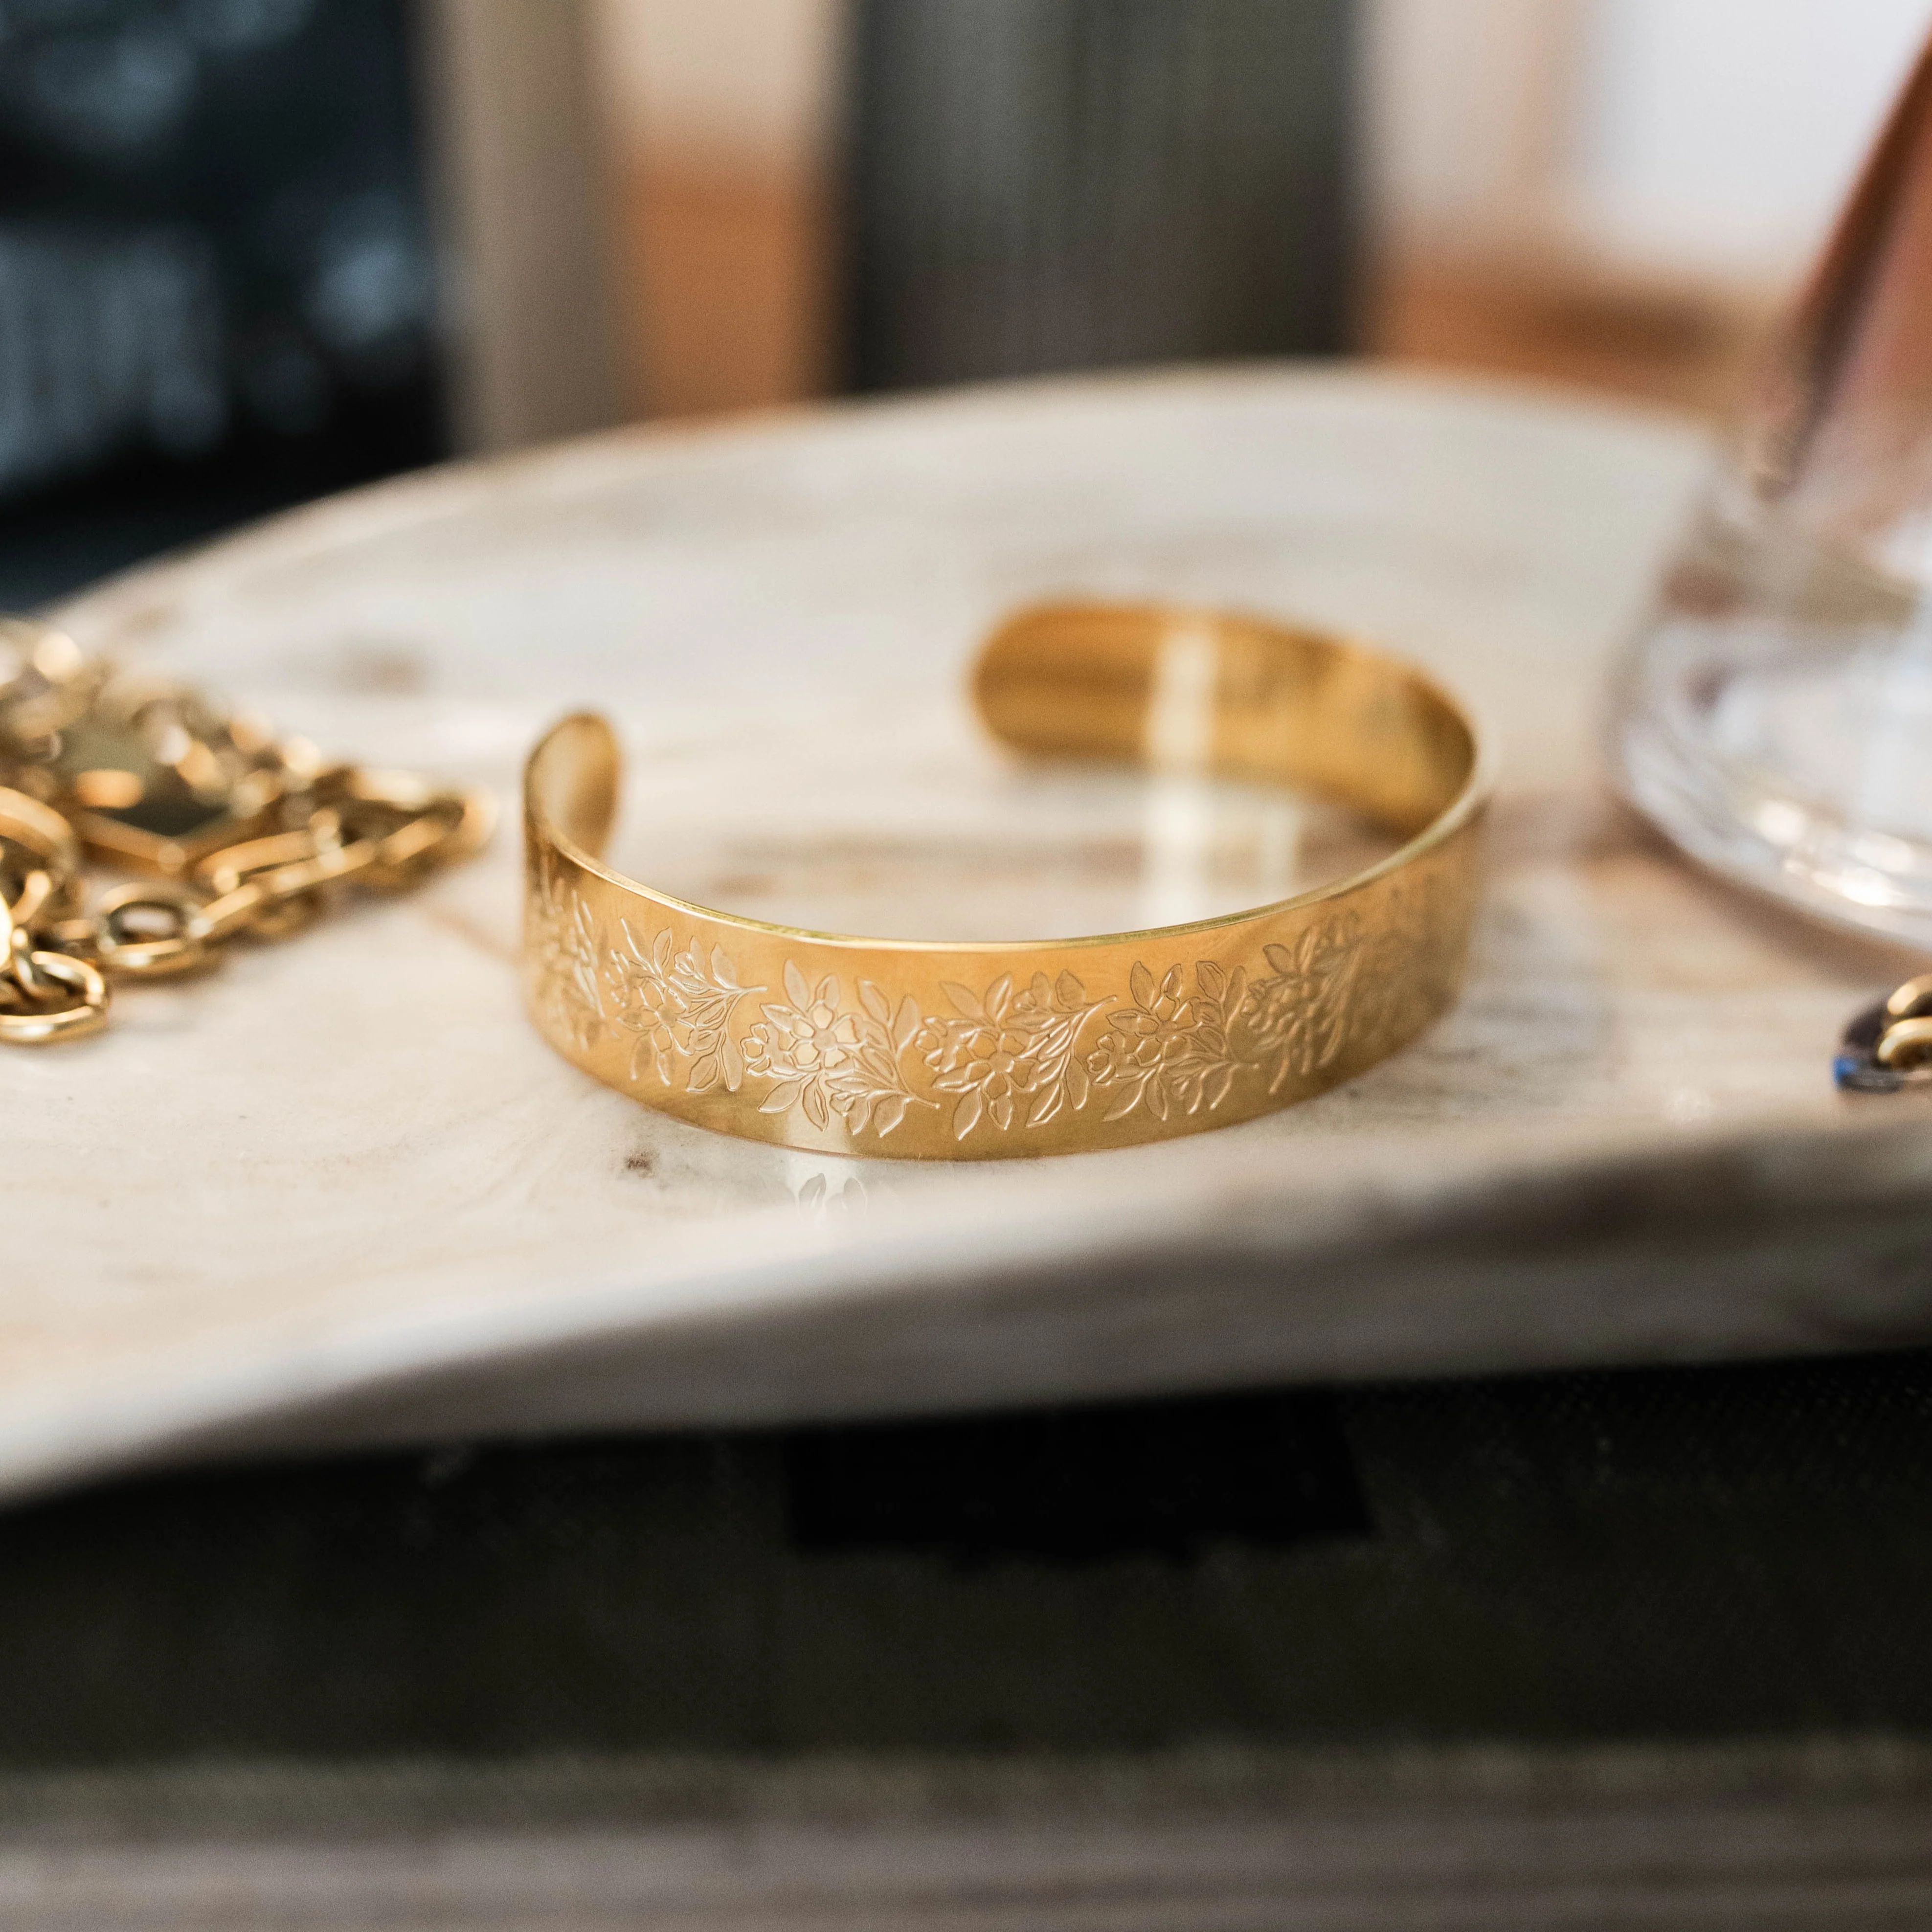 Grace and Glory Cuff | TDGC | The Daily Grace Co.